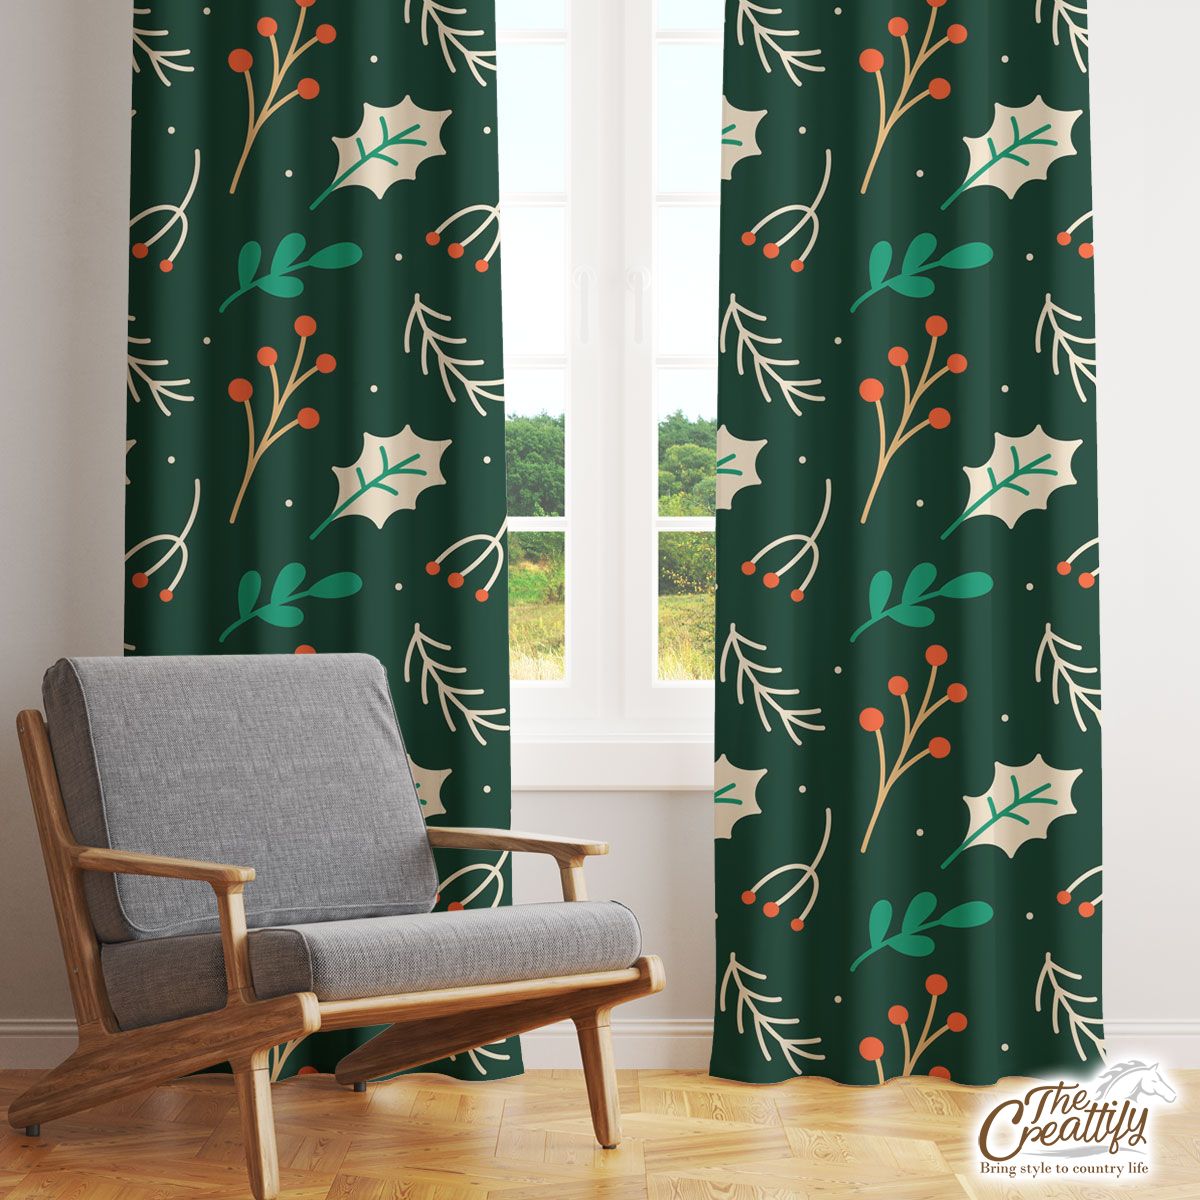 Red Berries And Holly Leaf Pattern Window Curtain